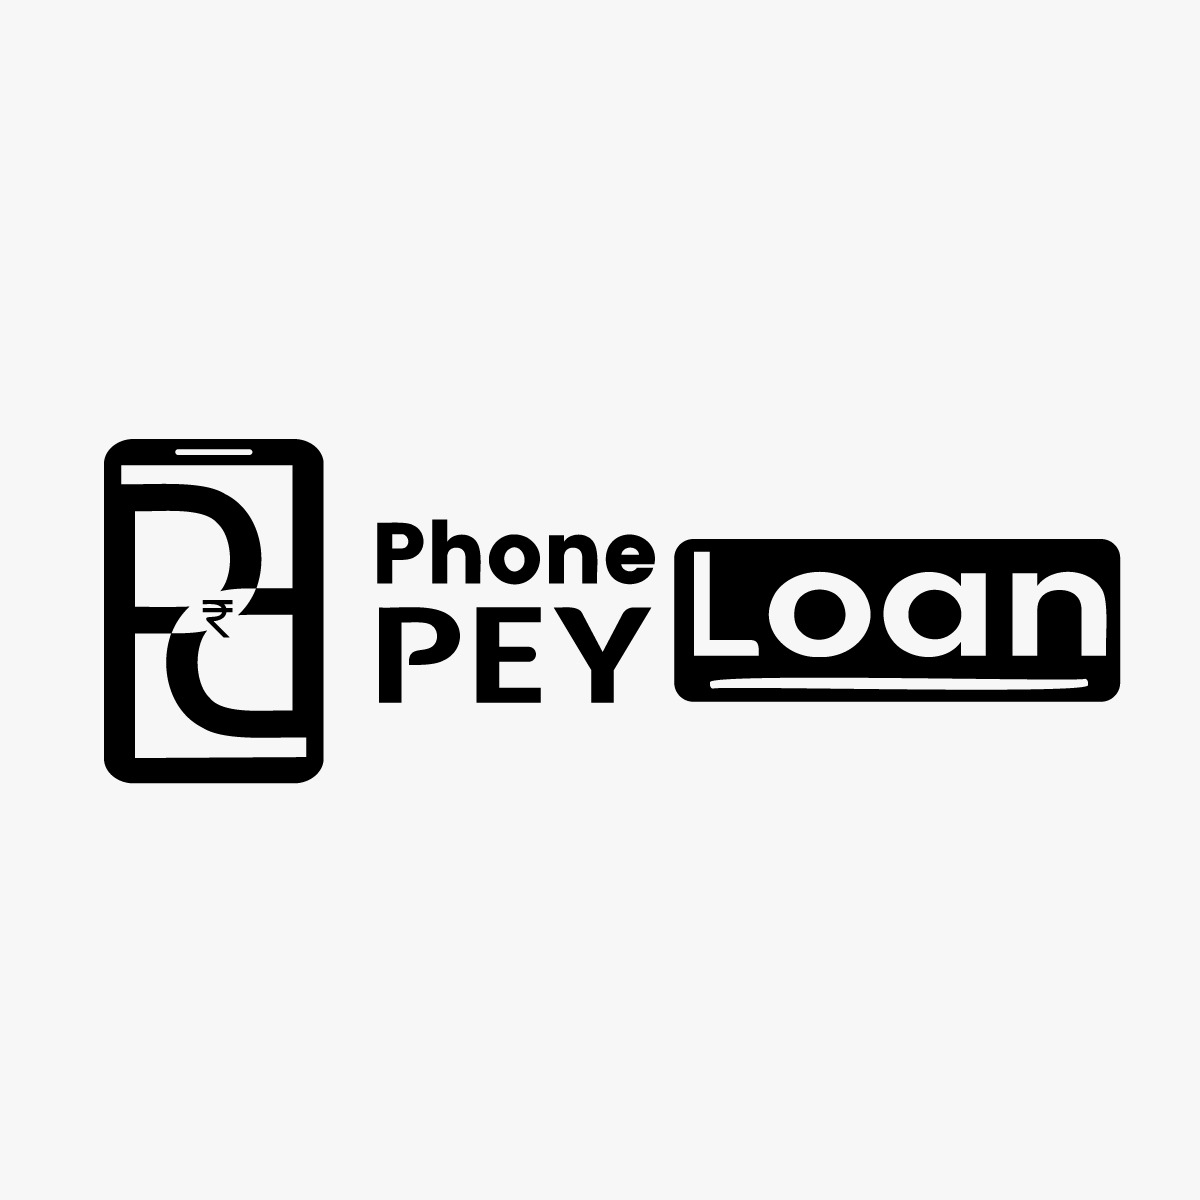  Personal Loan in Indore | Phonepeyloan